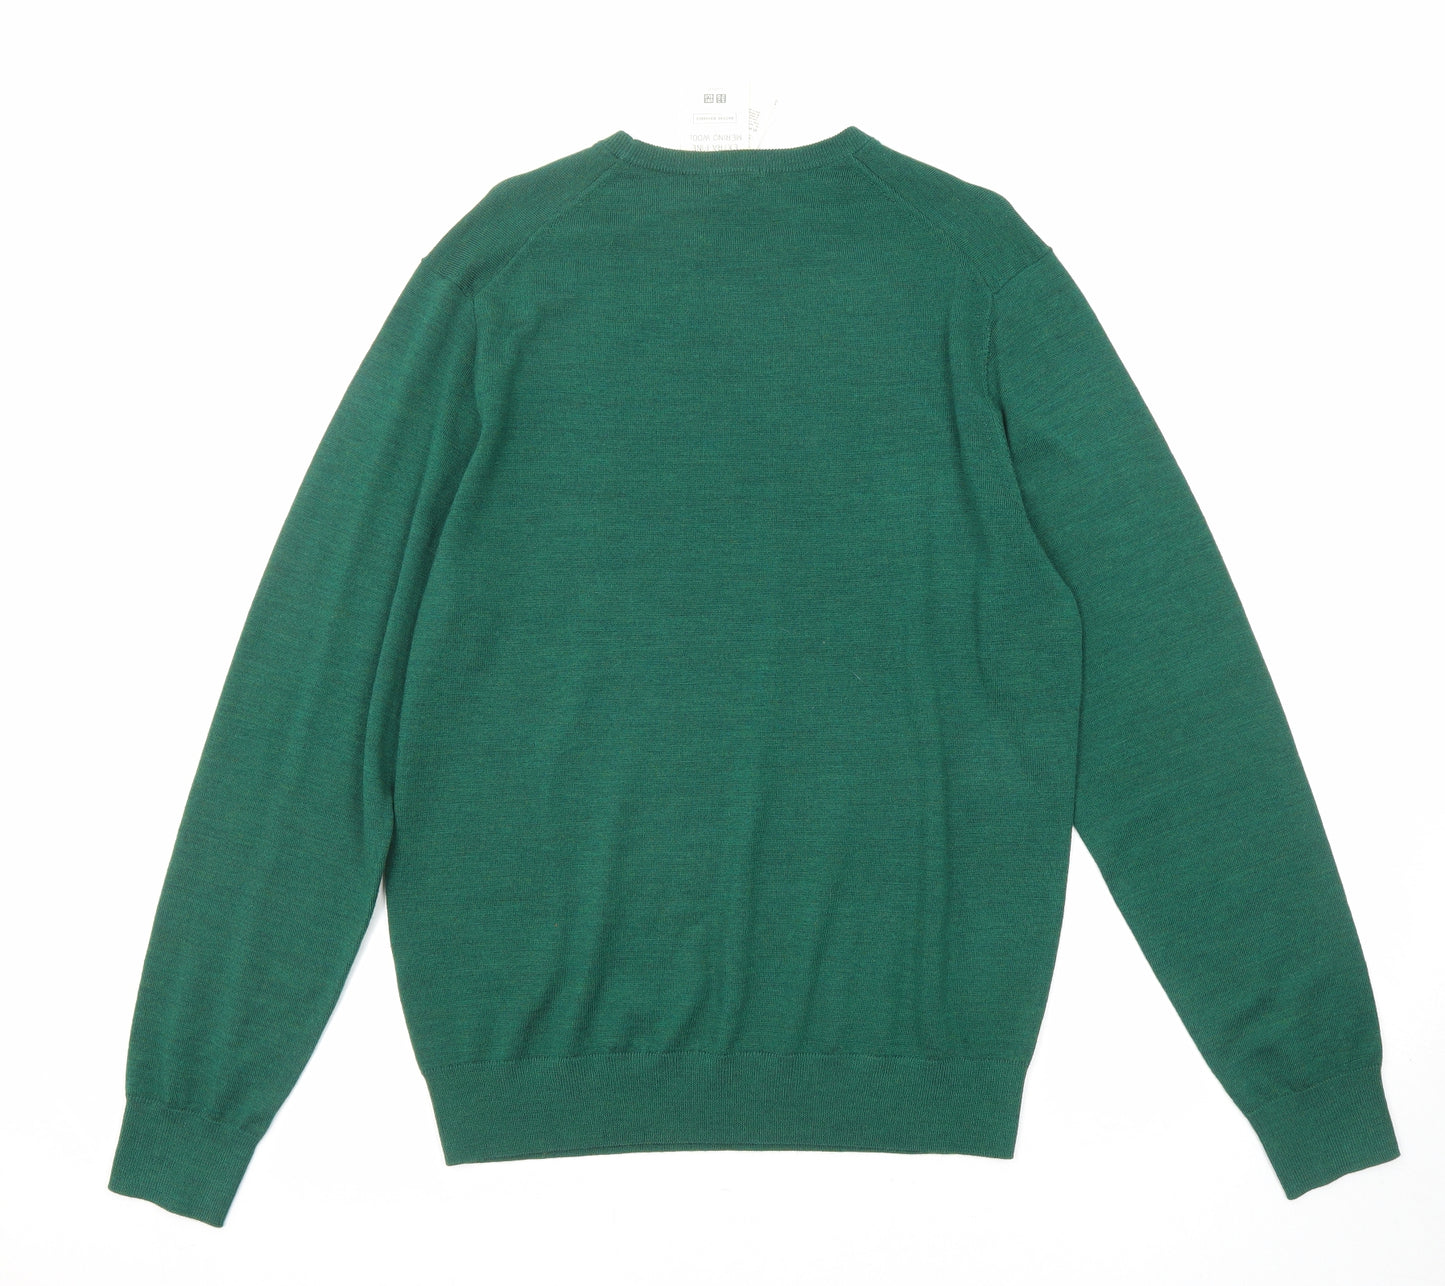 Uniqlo Mens Green Crew Neck Wool Pullover Jumper Size M Long Sleeve